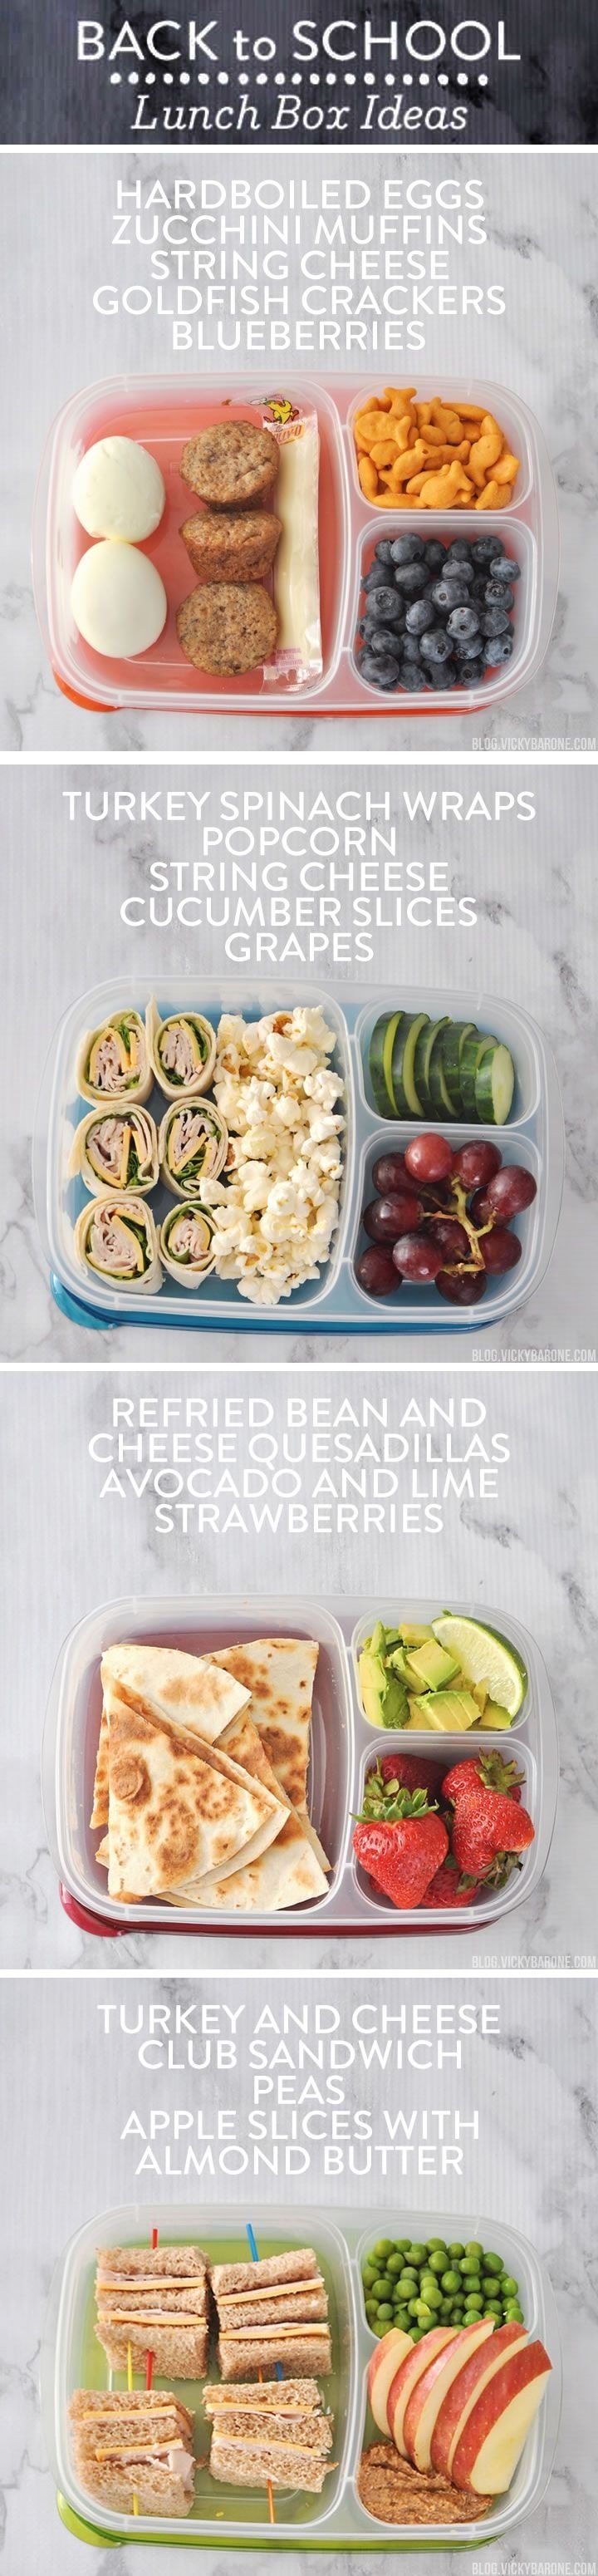 10 Awesome Food Day At Work Ideas 37 best lunch box ideas images on pinterest lunches health foods 3 2022